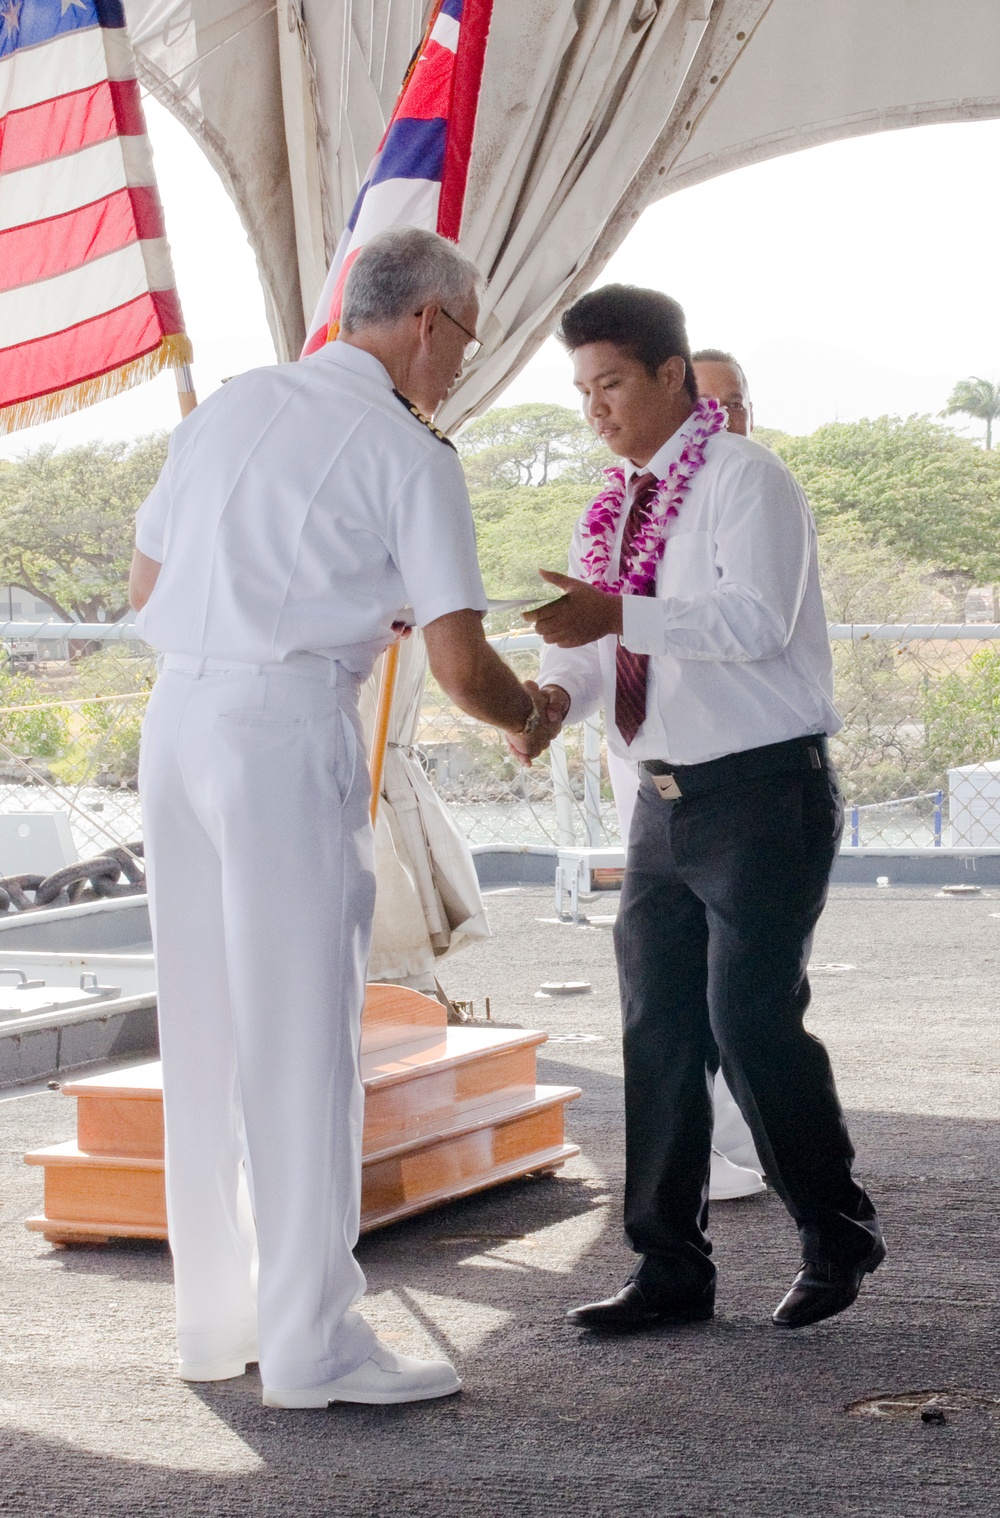 OCS of Hawaii hosts inaugural recognition ceremony honoring enlisting high school students